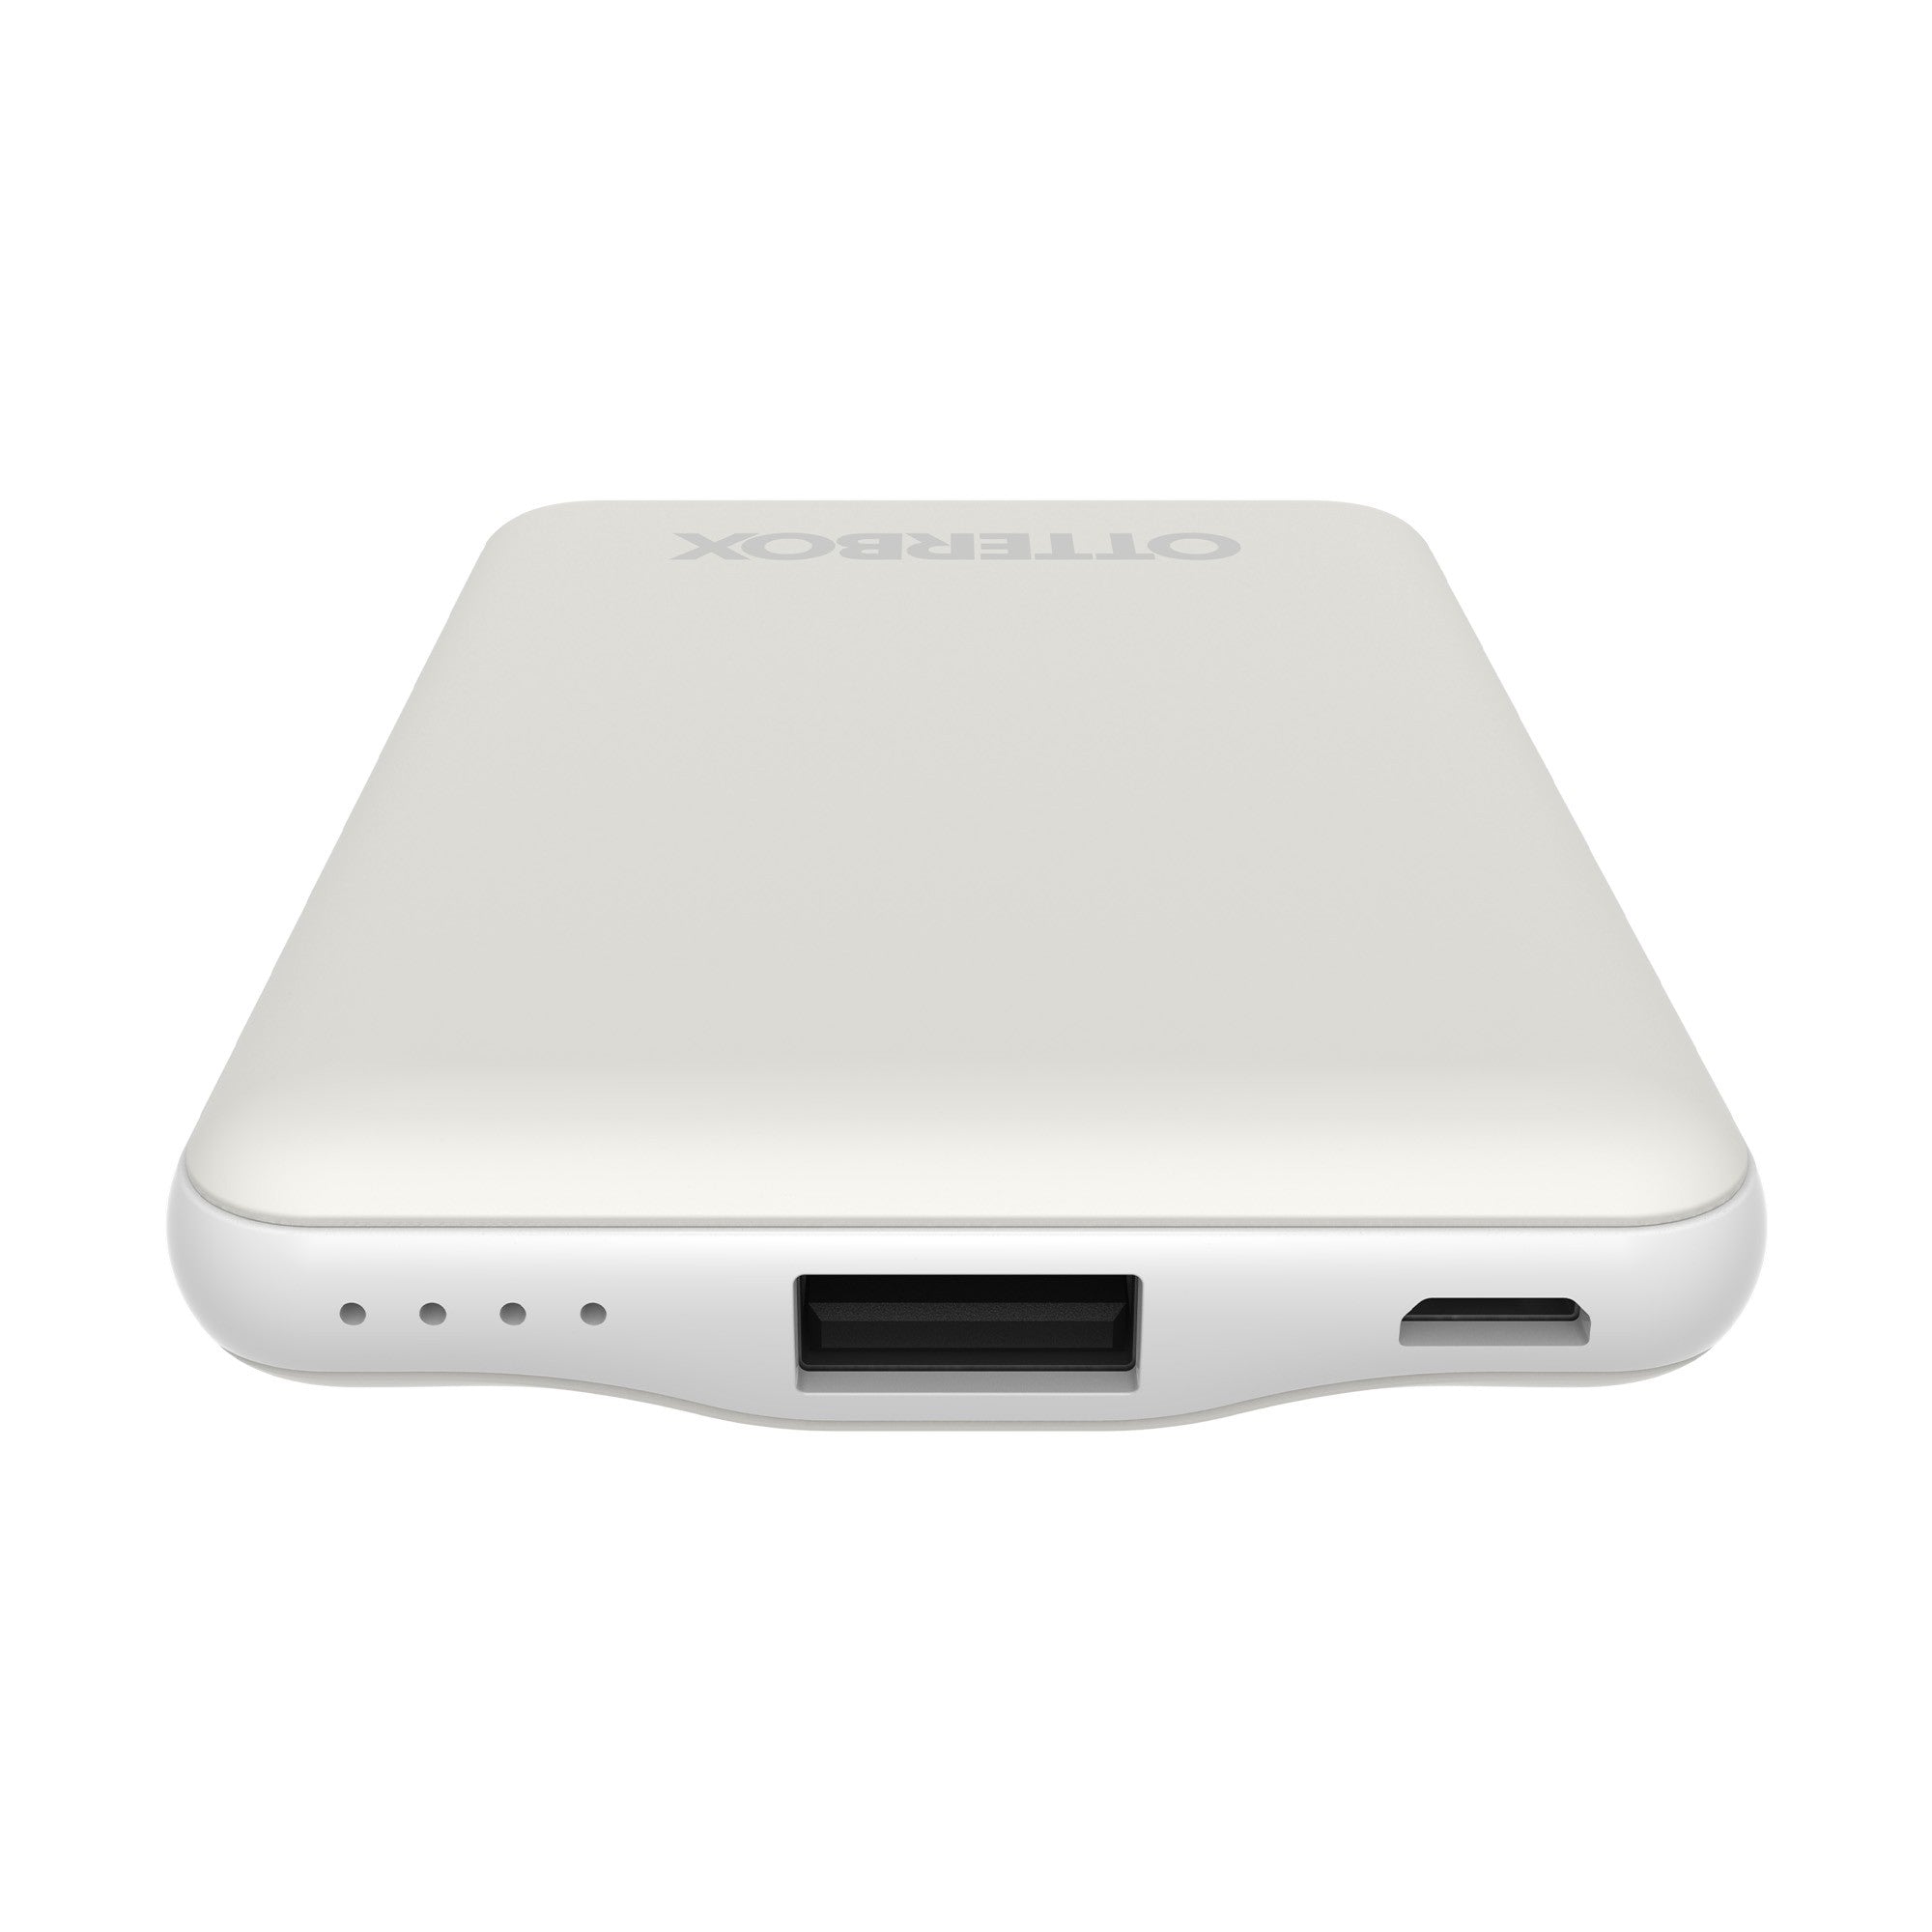 Otterbox 5,000 mAh 3-in-1 Portable Power Bank Mobile Charging Kit - White - 15-12040